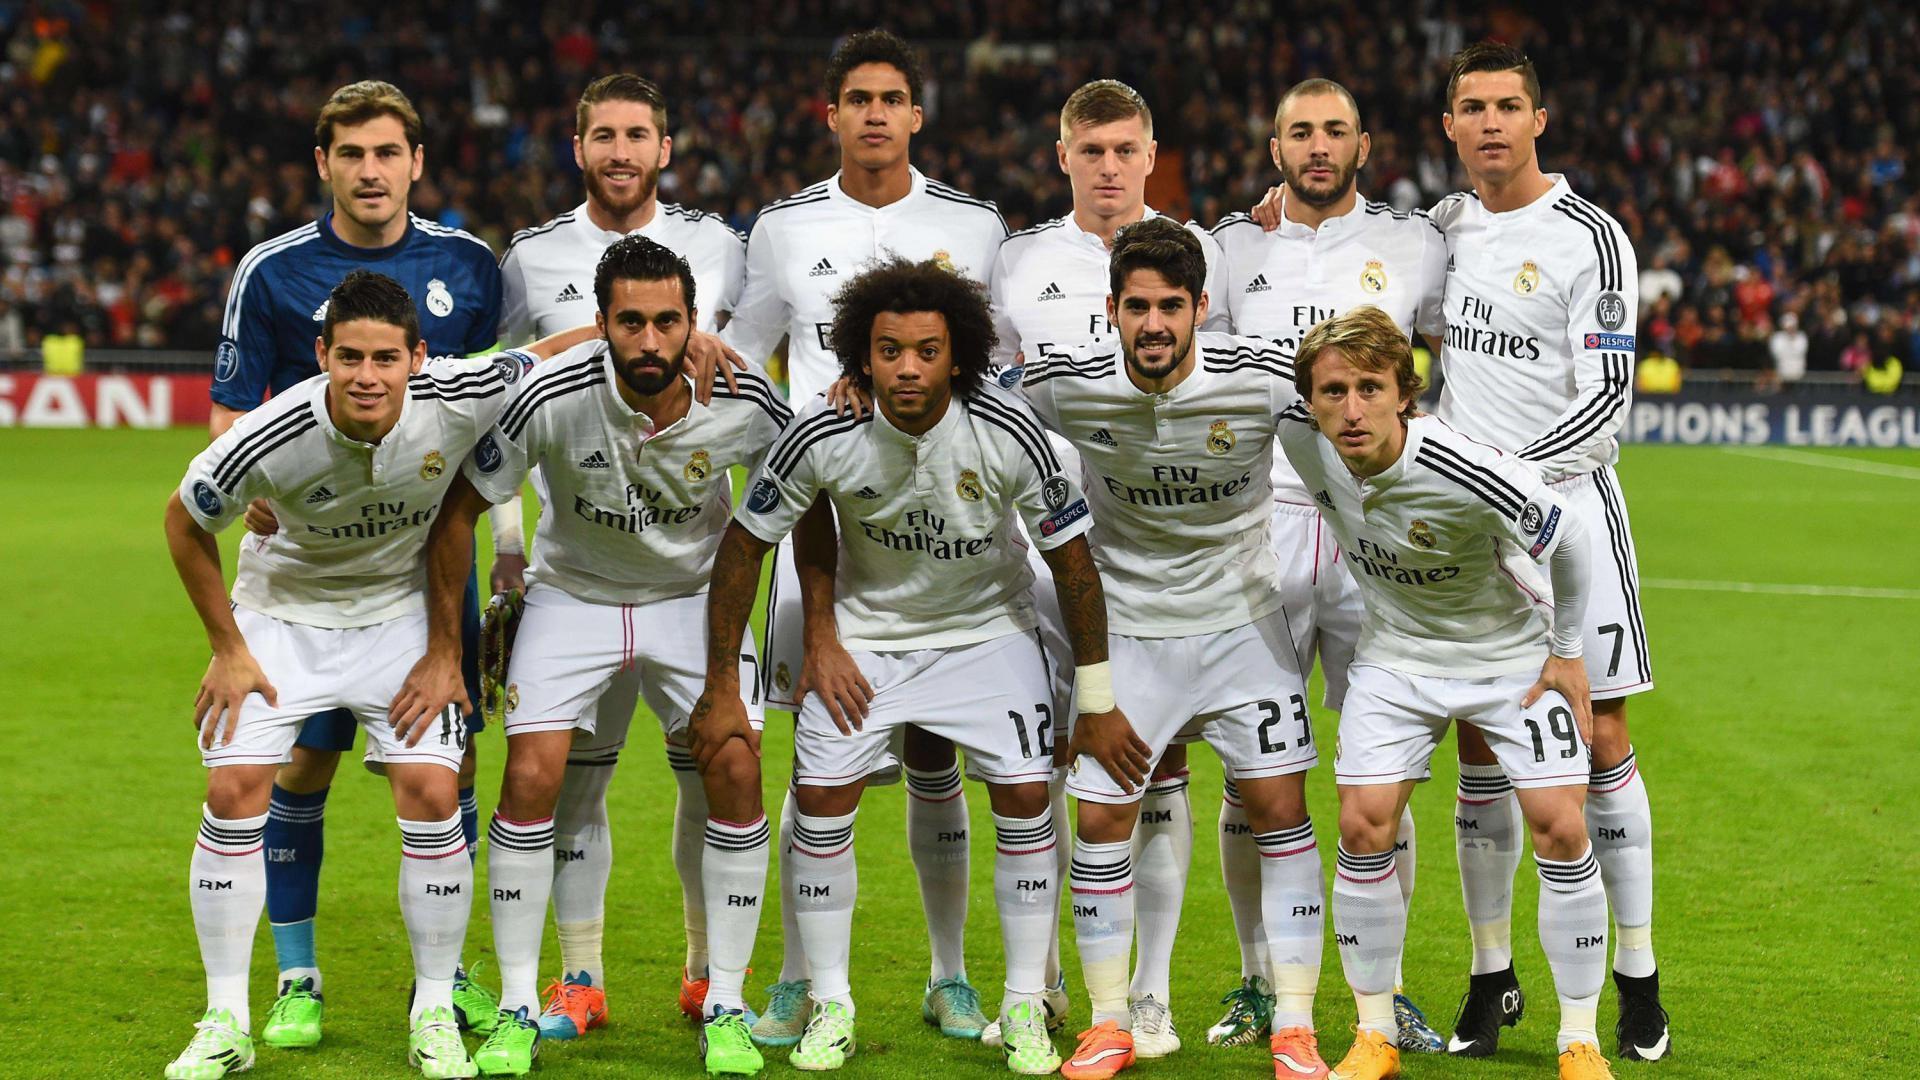 Real Madrid Wallpaper Players and Names for 2014